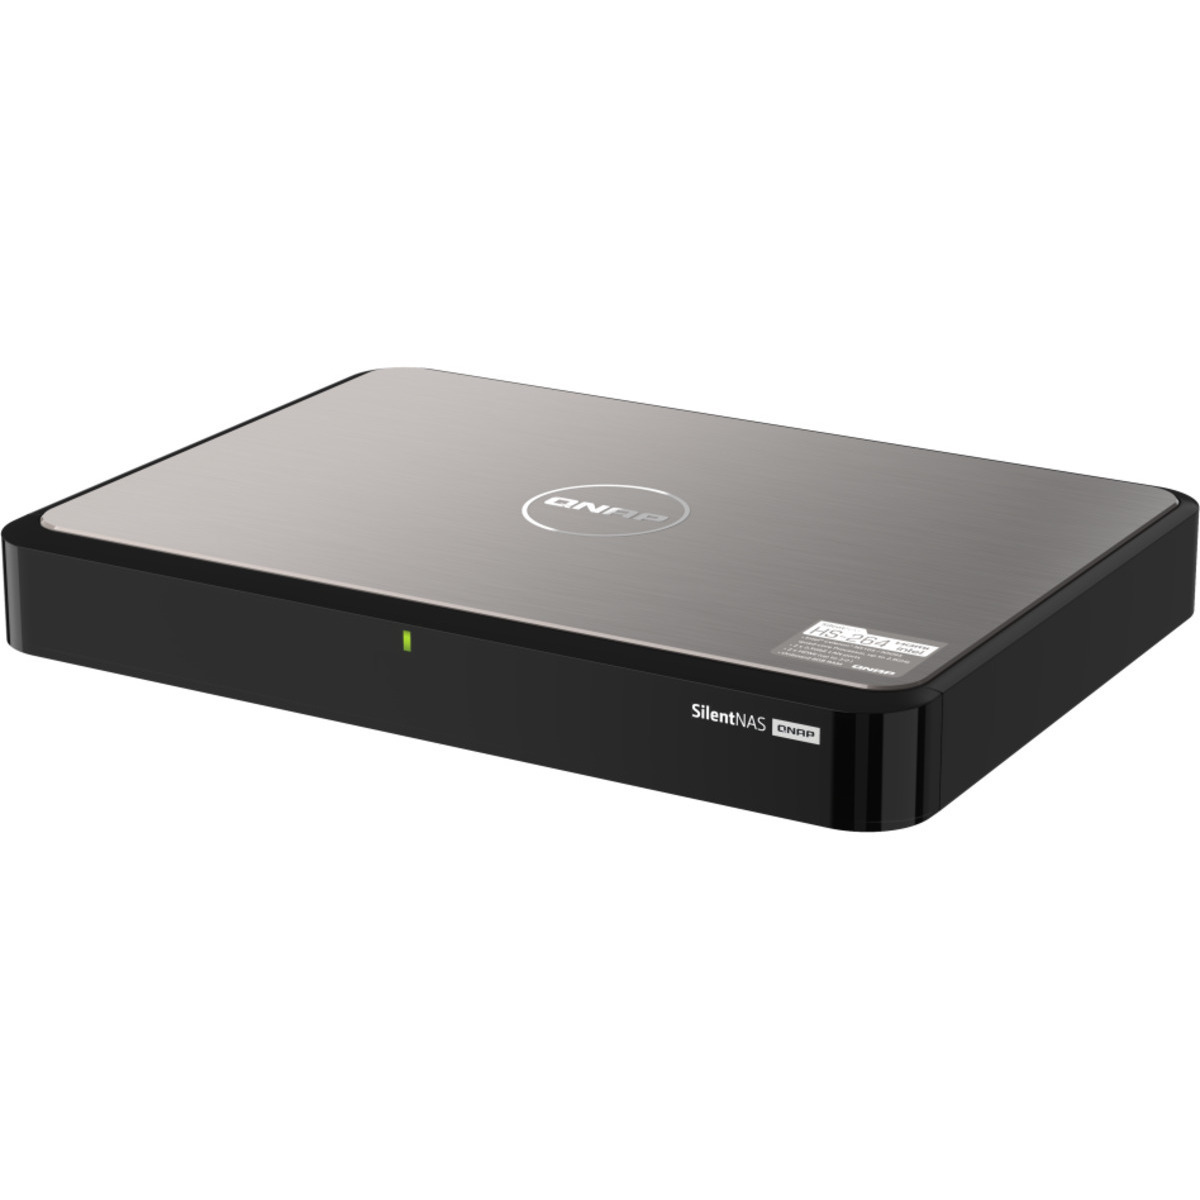 QNAP HS-264 4tb 2-Bay Desktop Multimedia / Power User / Business NAS - Network Attached Storage Device 2x2tb Western Digital Red SA500 WDS200T1R0A 2.5 560/530MB/s SATA 6Gb/s SSD NAS Class Drives Installed - Burn-In Tested HS-264